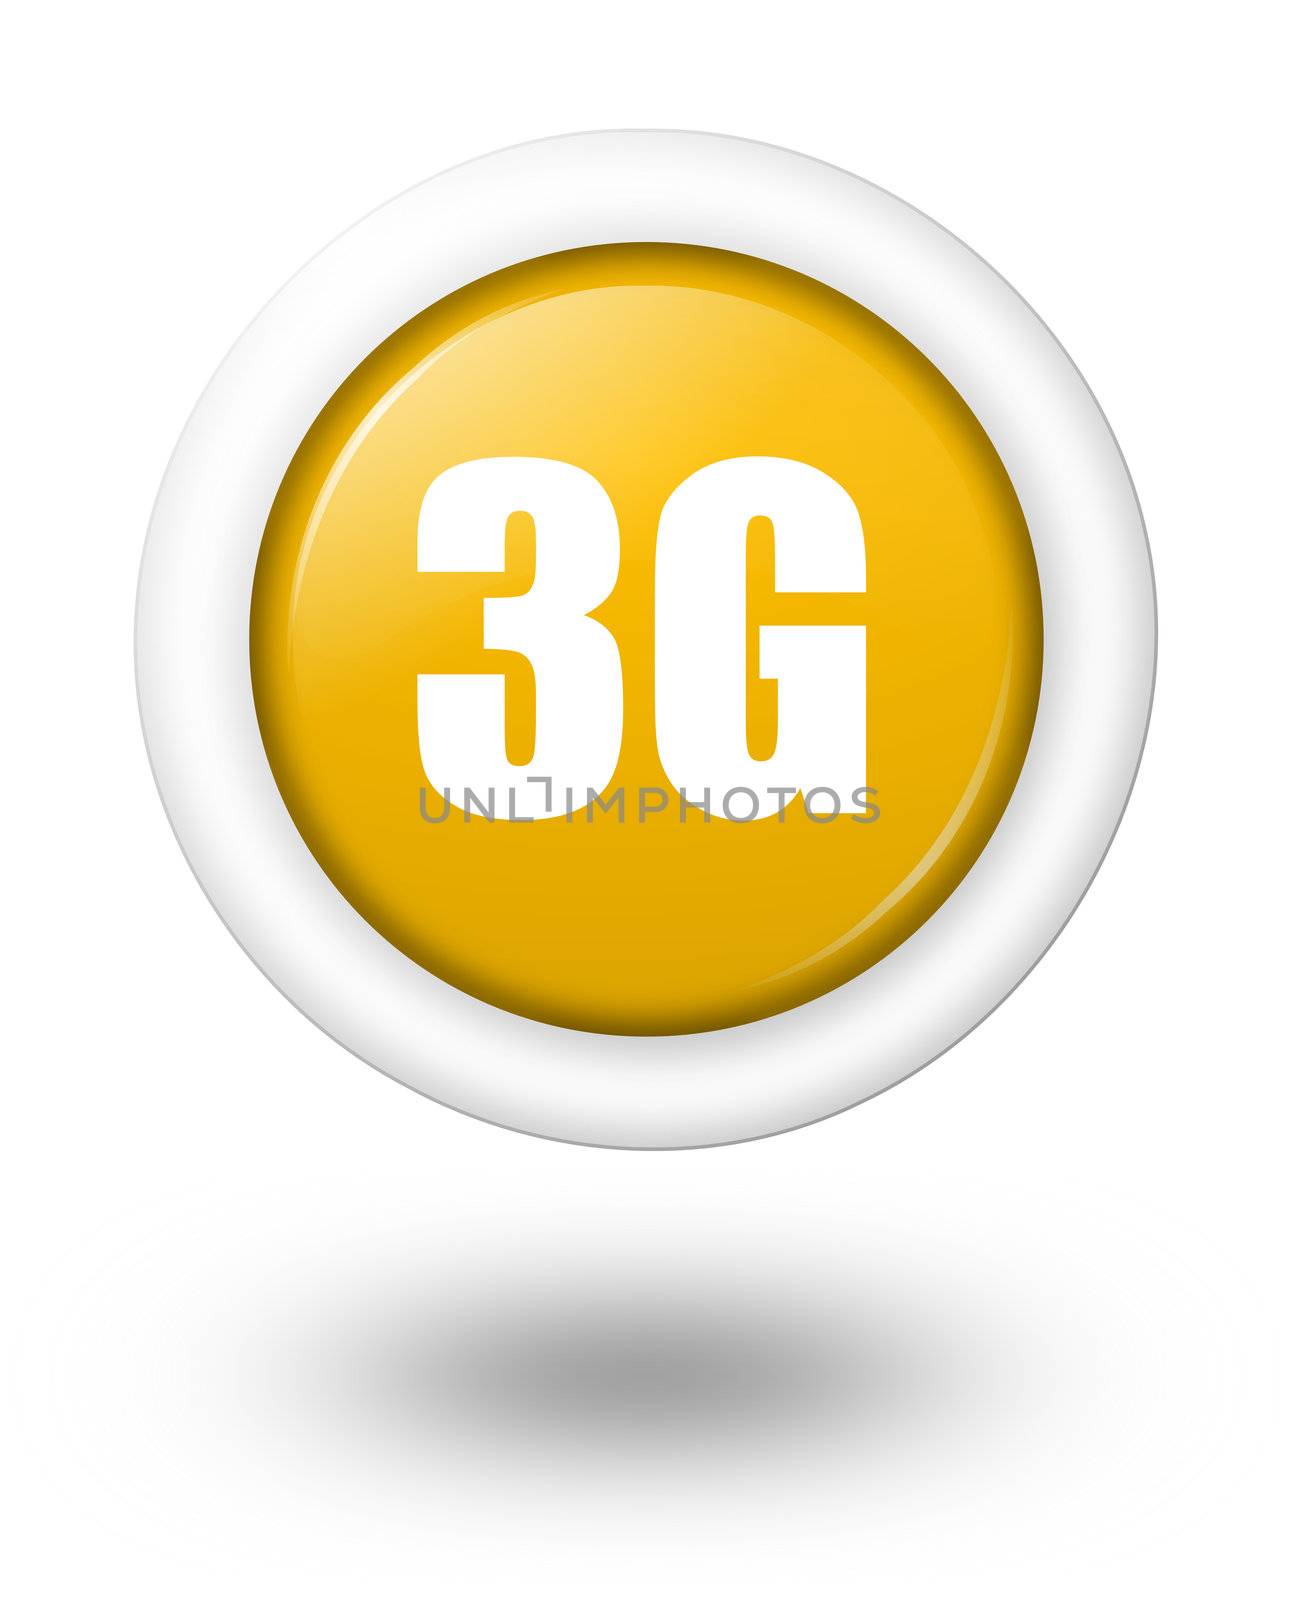 3G telecommunication symbol with shadow by make